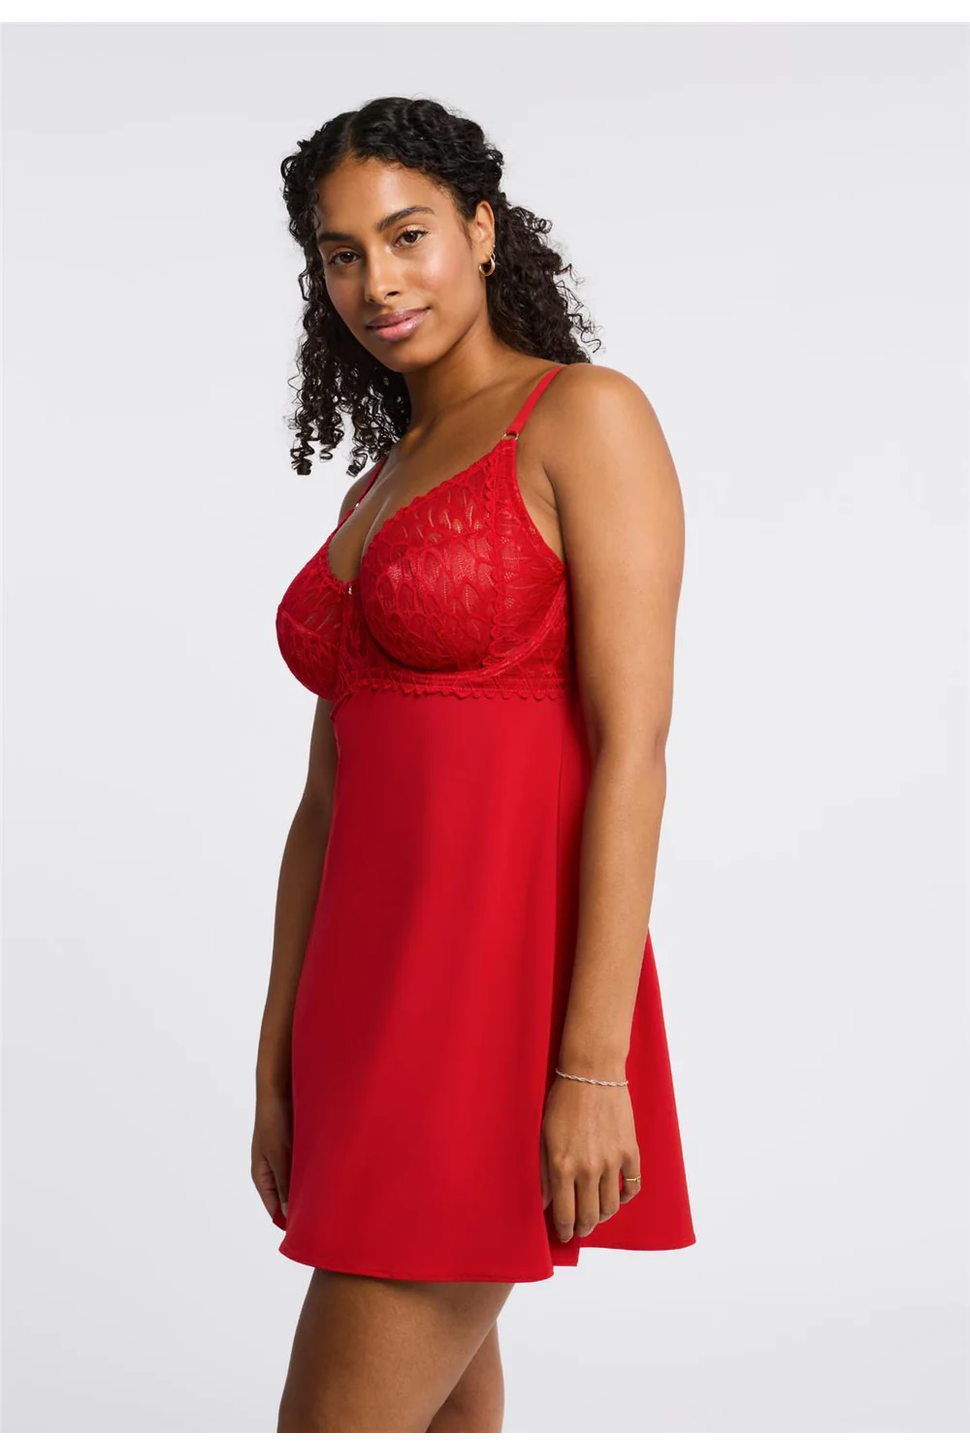 Montelle Lacy Full Cup Muse Babydoll Set - Style 9306, side